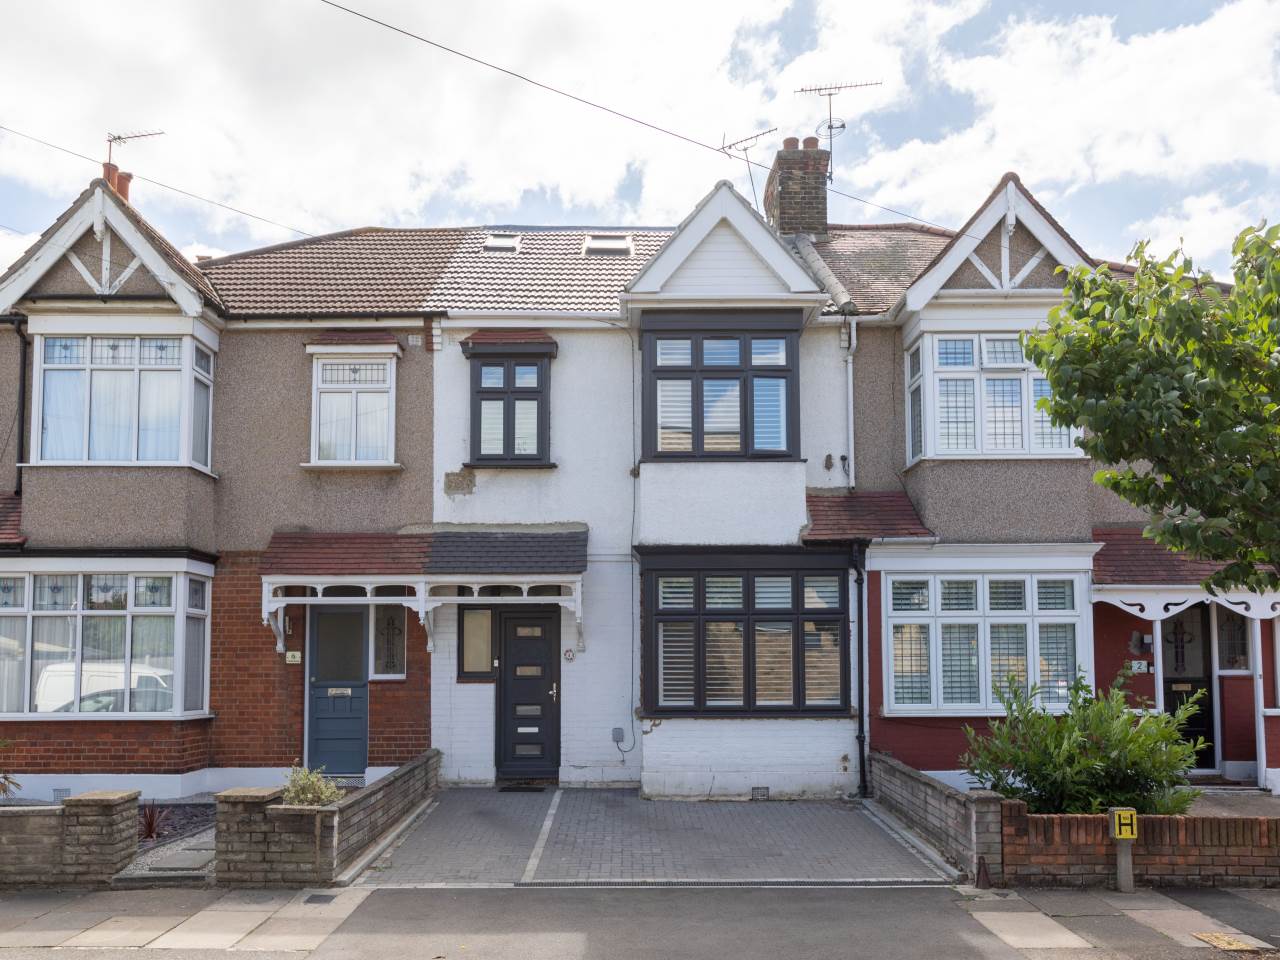 4 bed house to rent in Trinity Road, Barkingside, IG6 